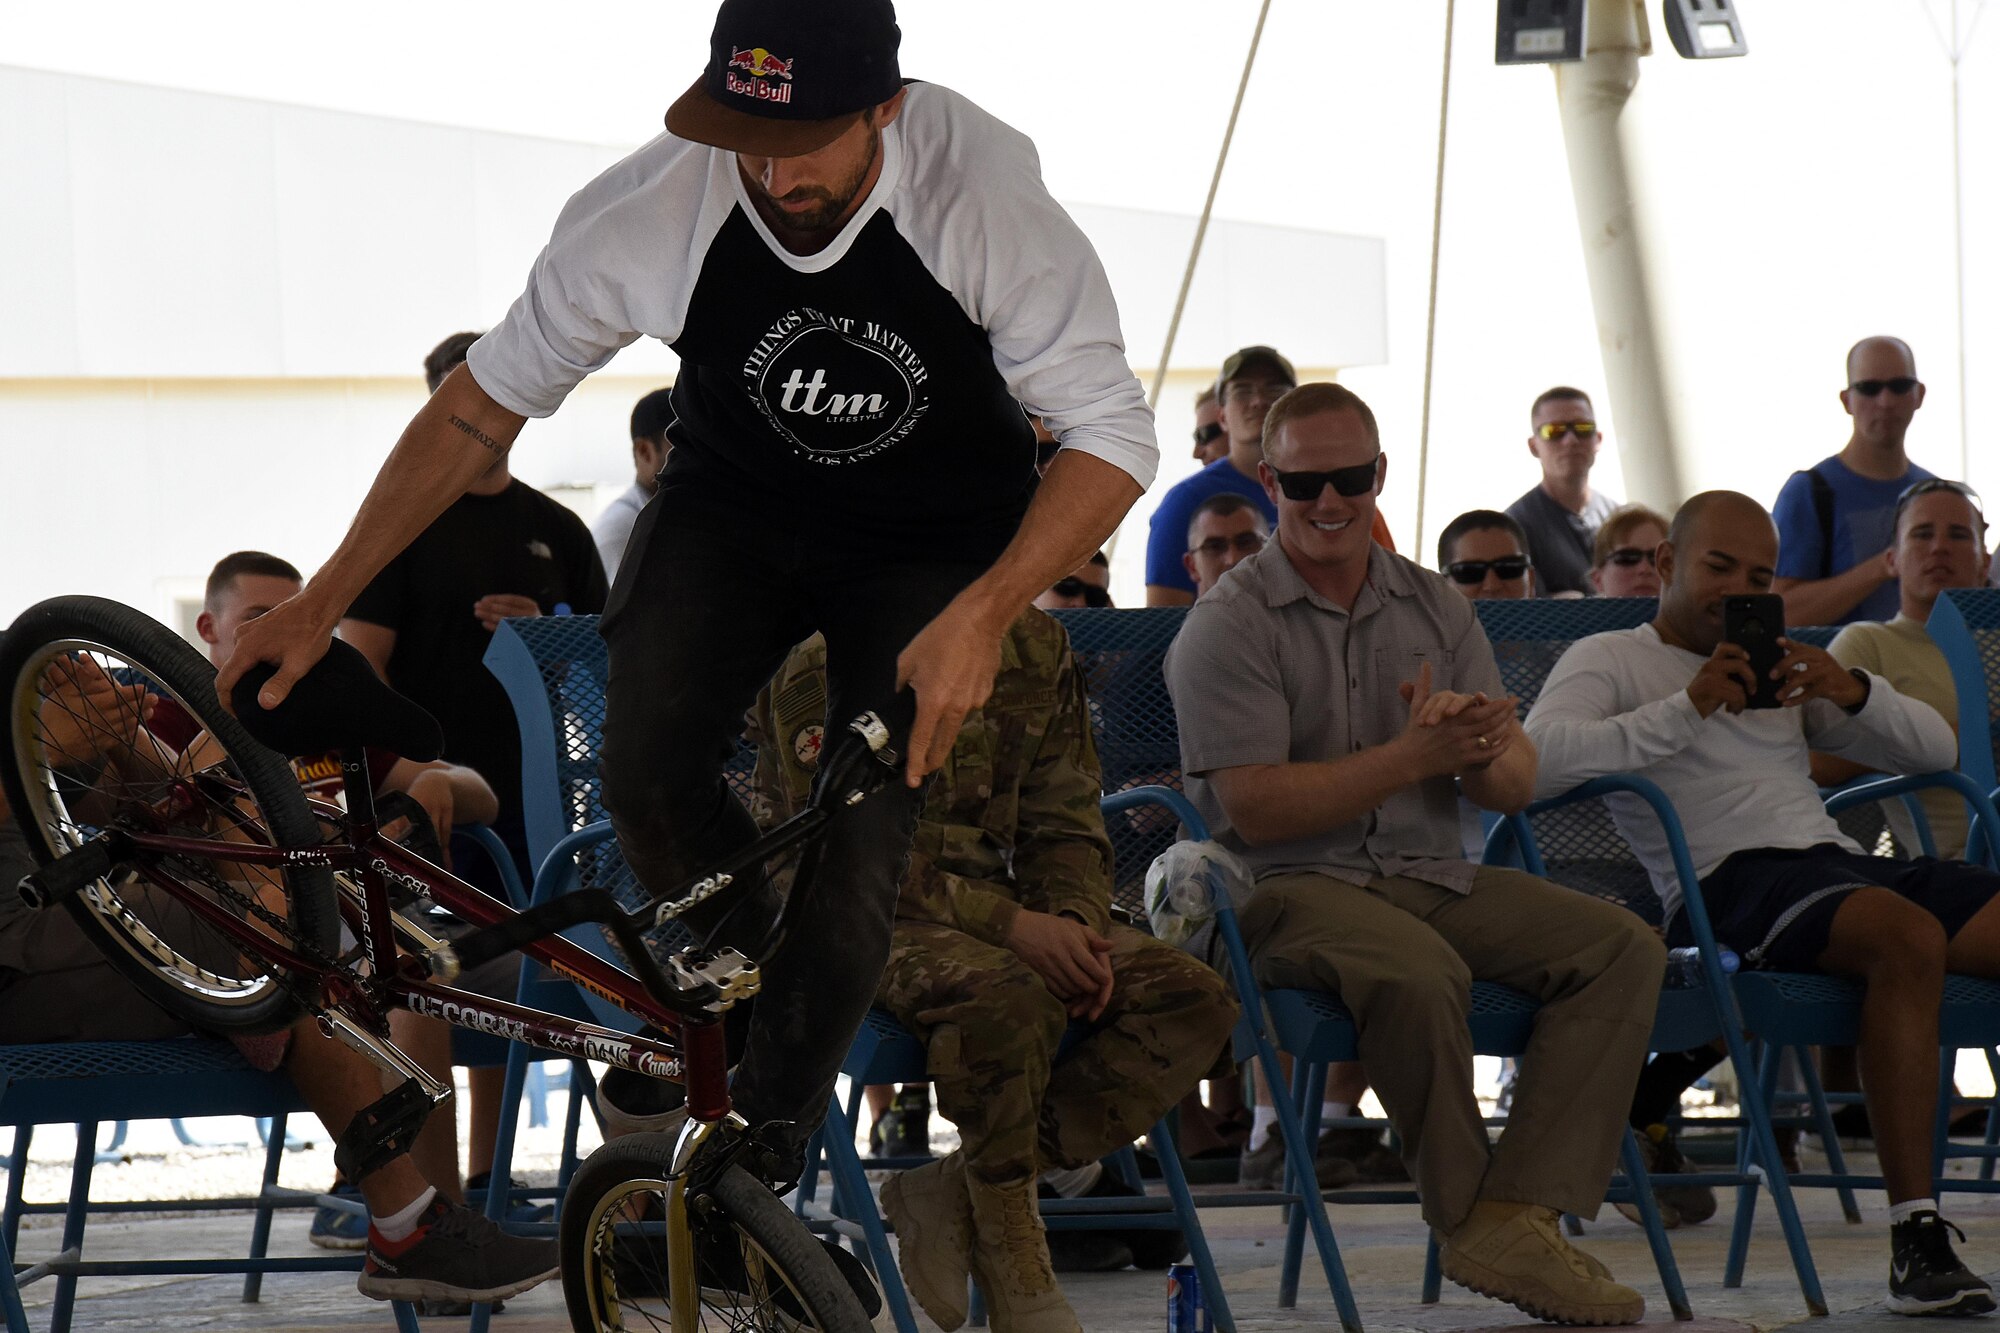 Terry Adams, a Bikes Over Baghdad BMX rider, preforms a trick at Al Udeid Air Base, Qatar, April 20, 2017. Bikes Over Baghdad is a professional team of BMX Riders who travel throughout the U.S. Central Command area of responsibility putting on shows for service members. (U.S. Air Force photo by Senior Airman Cynthia A Innocenti)